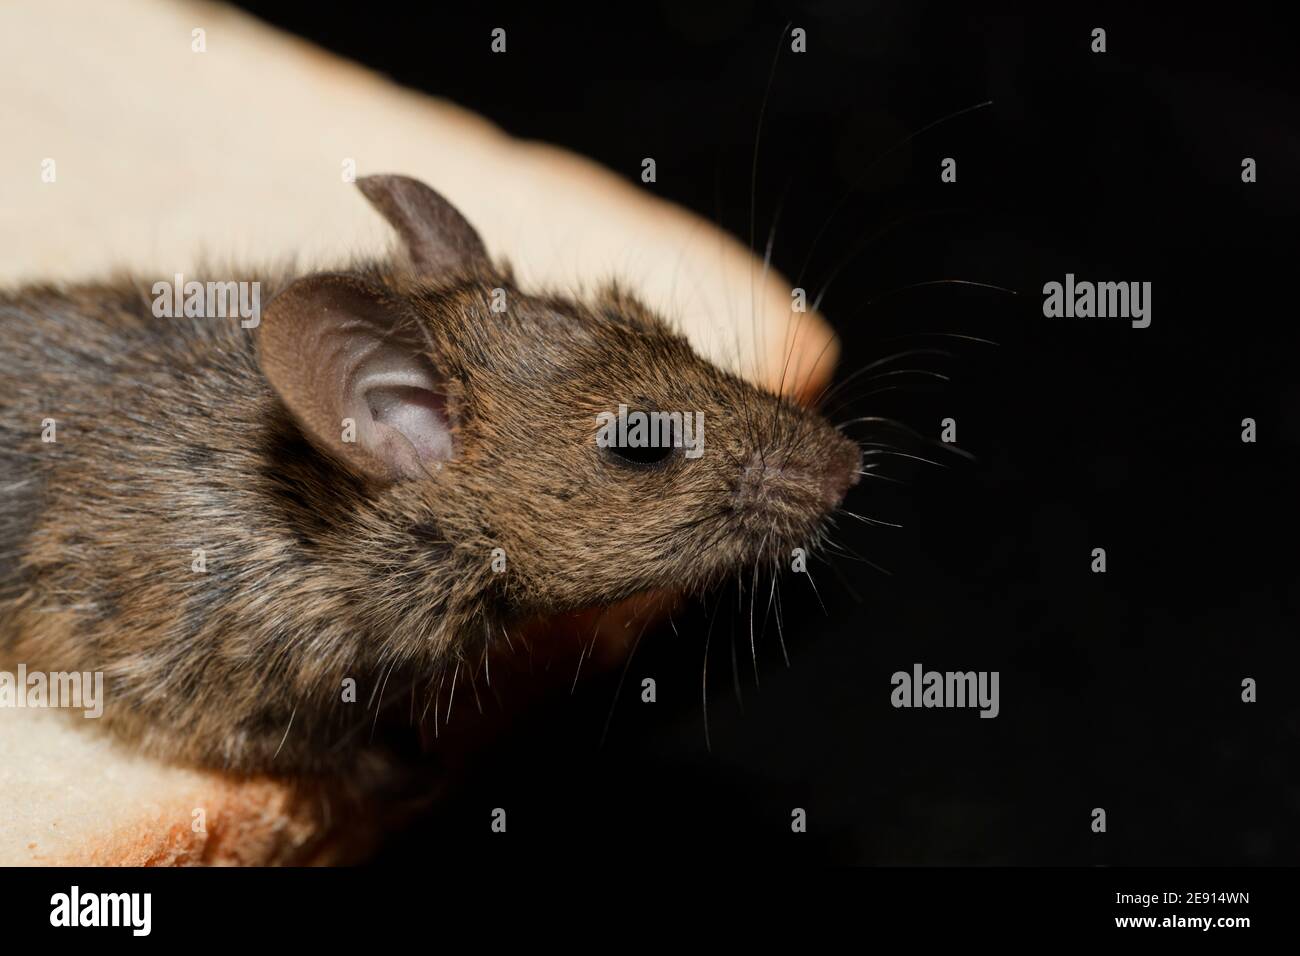 Infestation of mice in a pantry Stock Photo